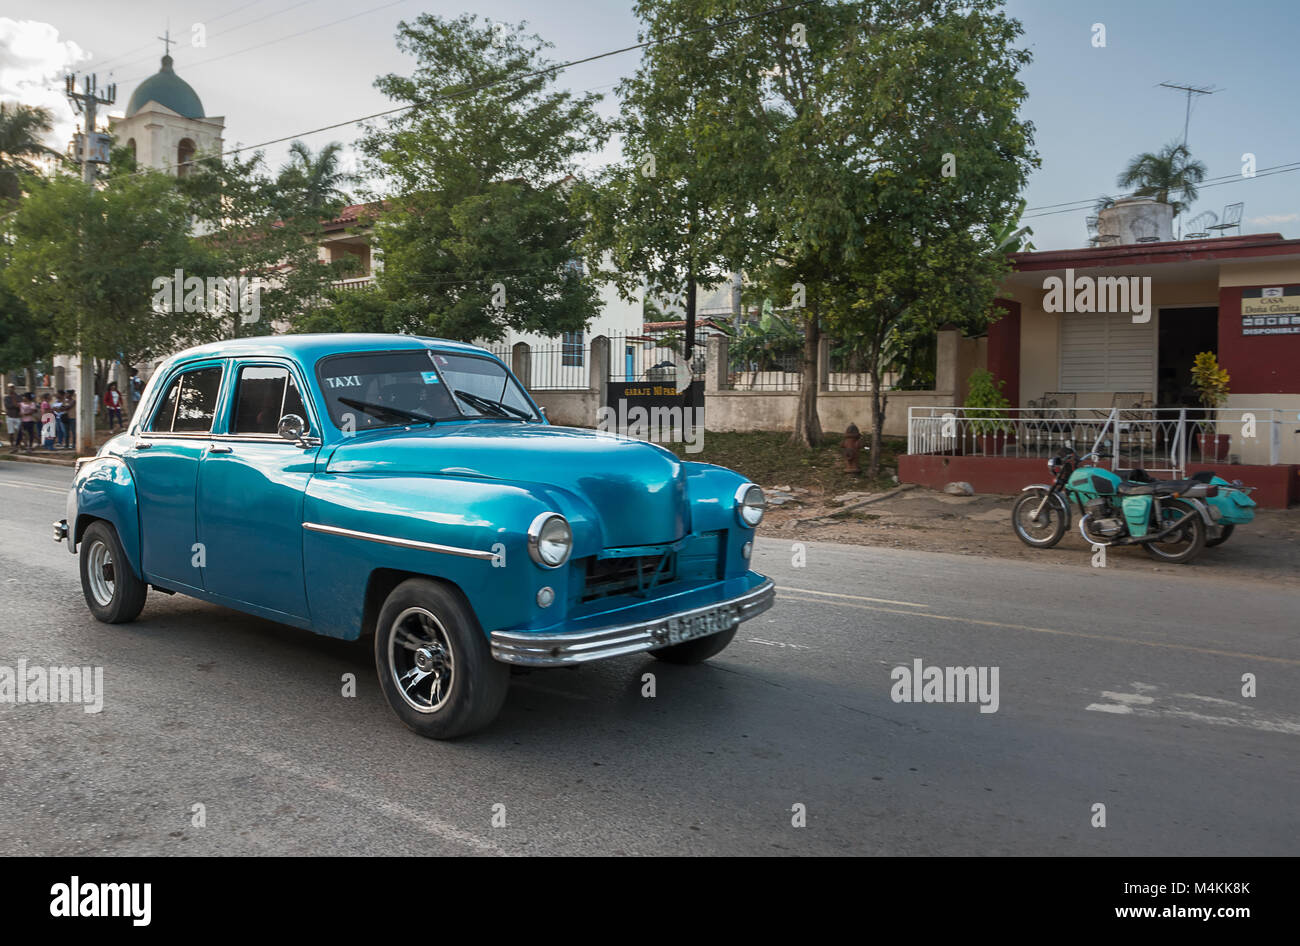 Vinales, Cuba - December 5, 2017: Old 1950s car in the central street of Vinales Stock Photo